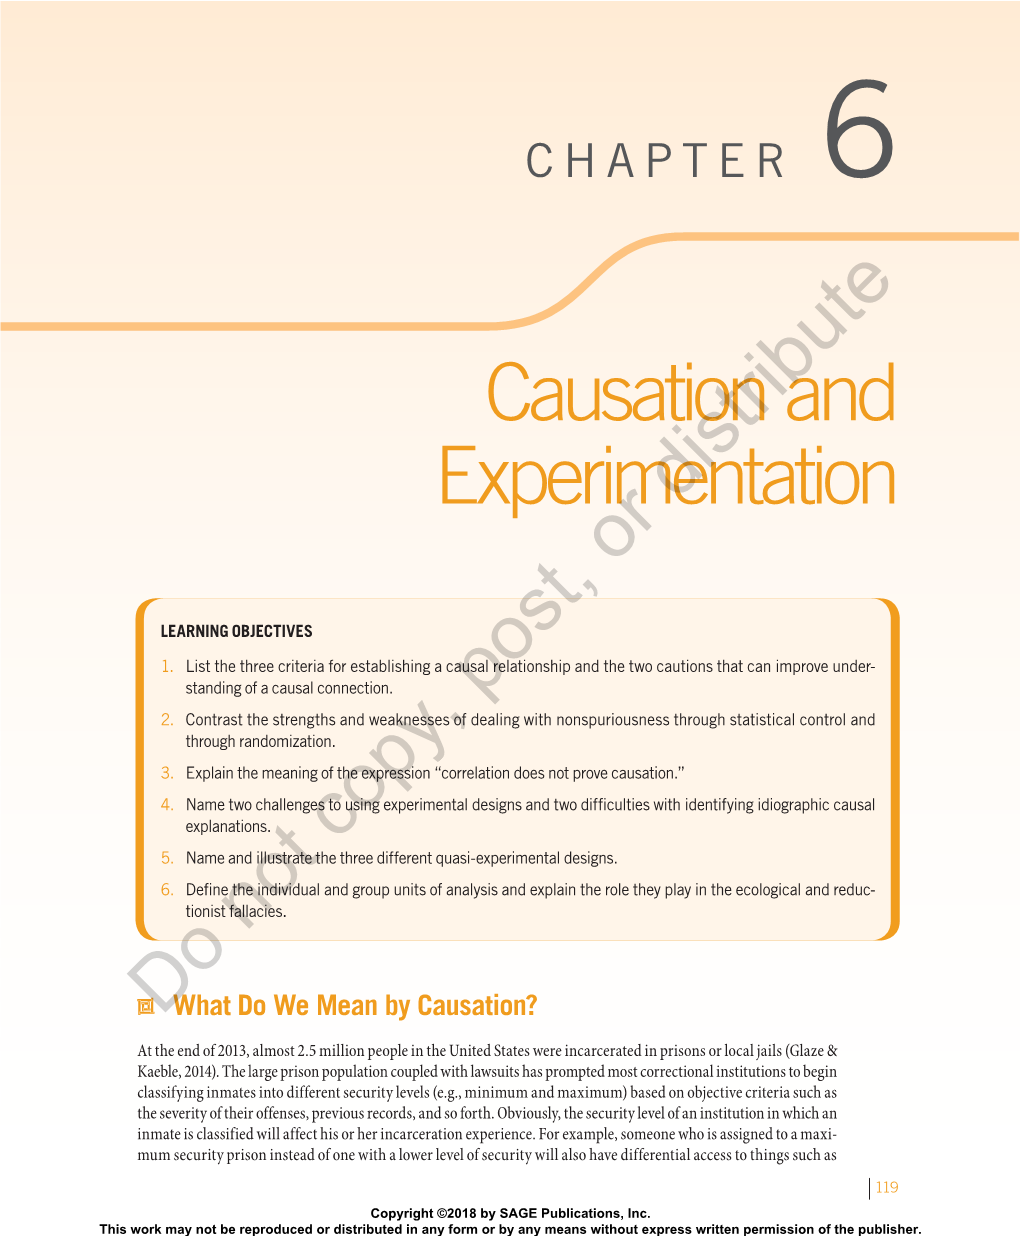 Causation and Experimentation